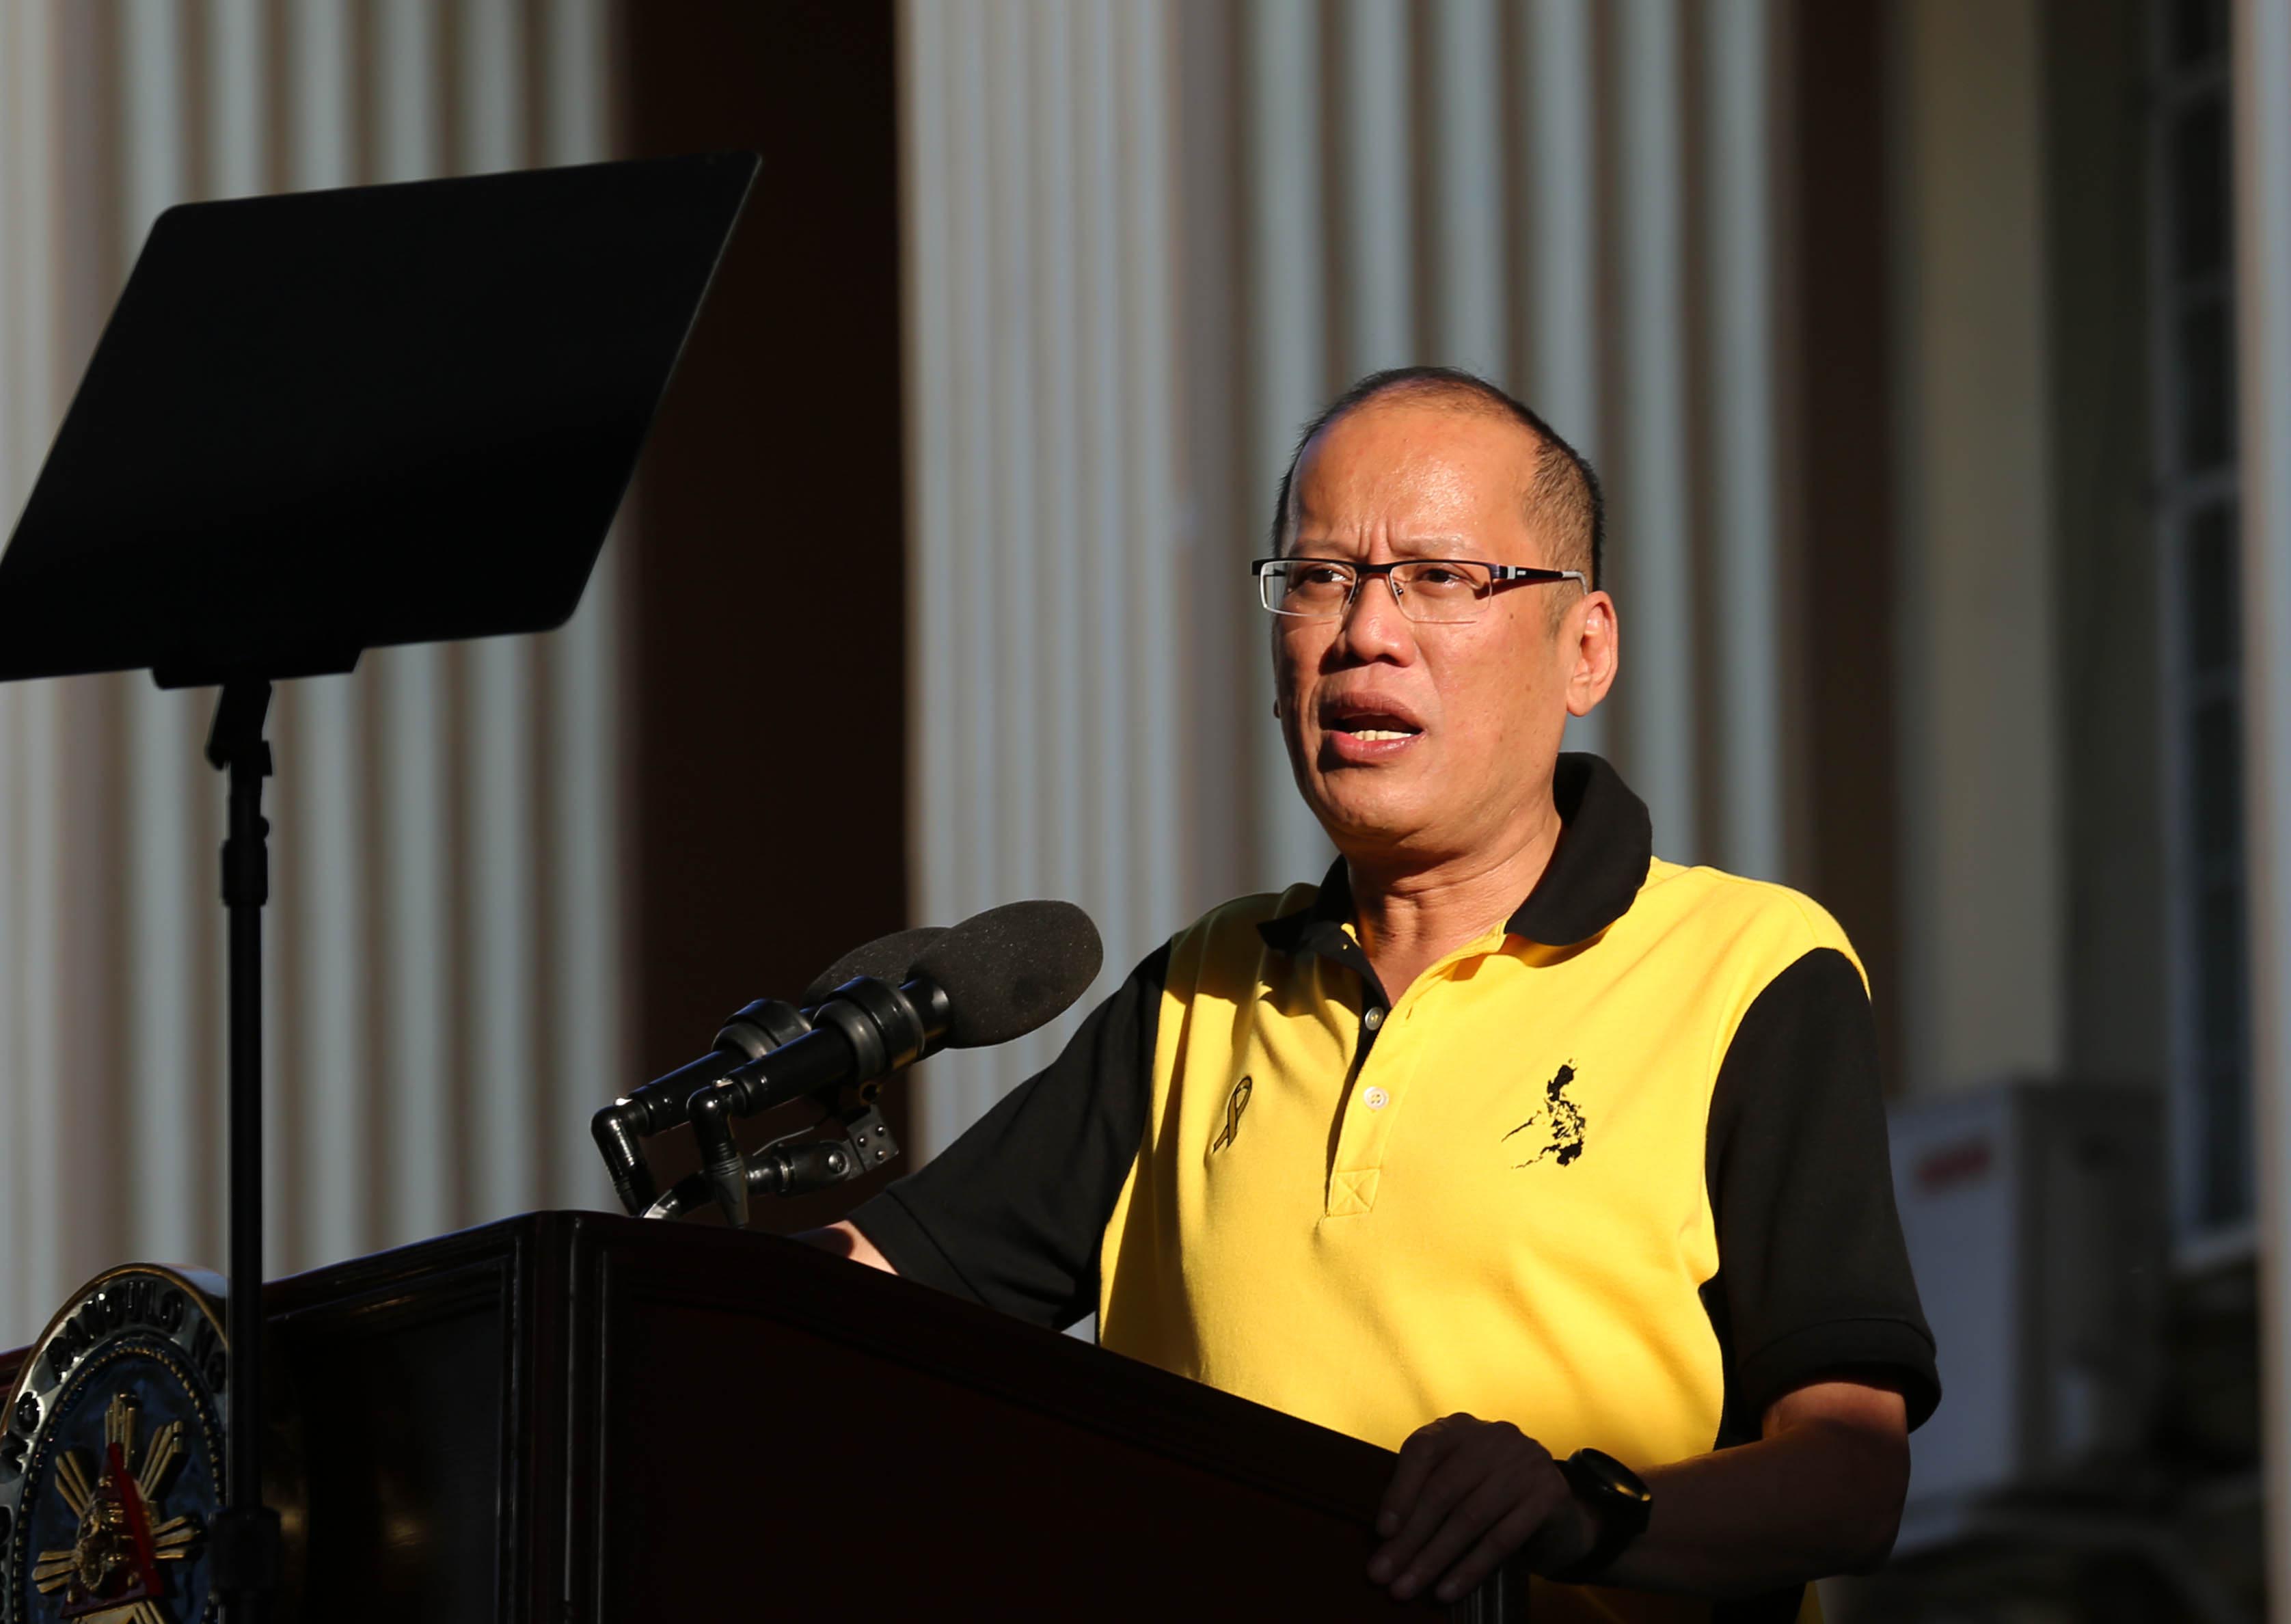 AQUINO SPEAKS. Liberal Party (LP) chairman President Benigno S. Aquino III delivers his speech during the Meeting with Local Leaders at the San Fernando City Pampangga Thursday, March 16, 2016. (Photo by Lauro Montellano Jr. /Malacanang Photo Bureau) 